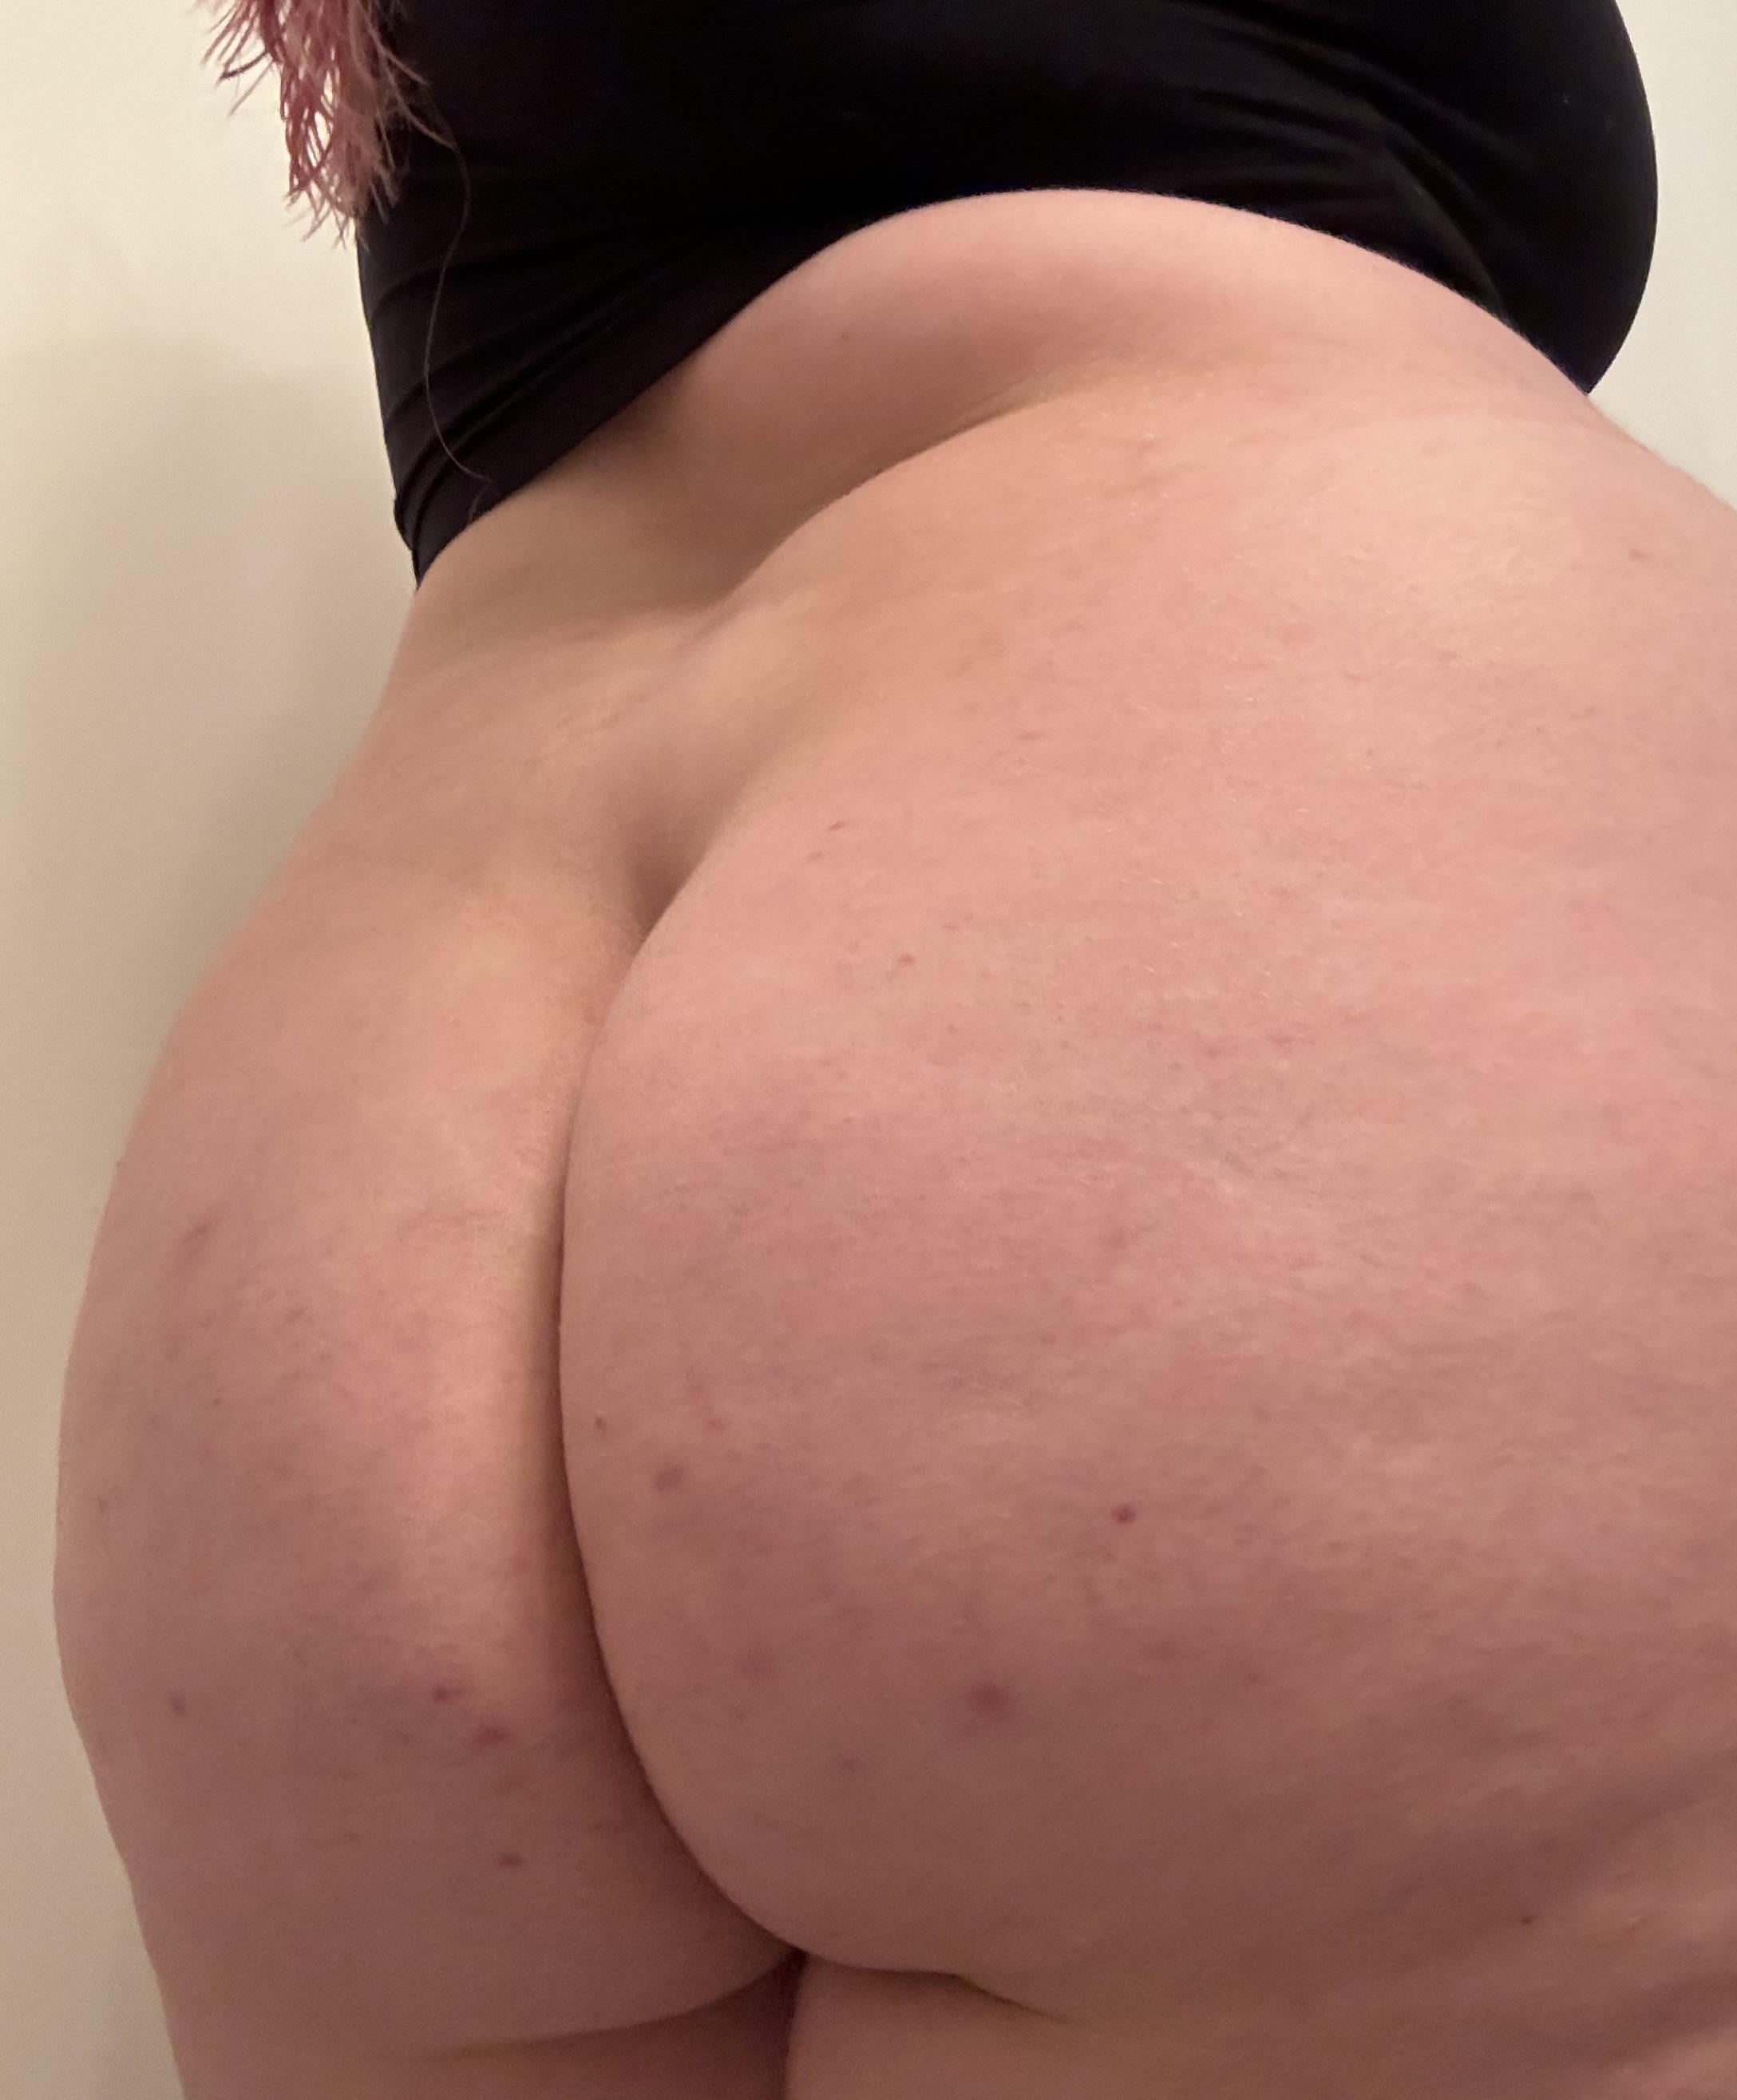 PAWG My freshly showered bare ass ready for you to